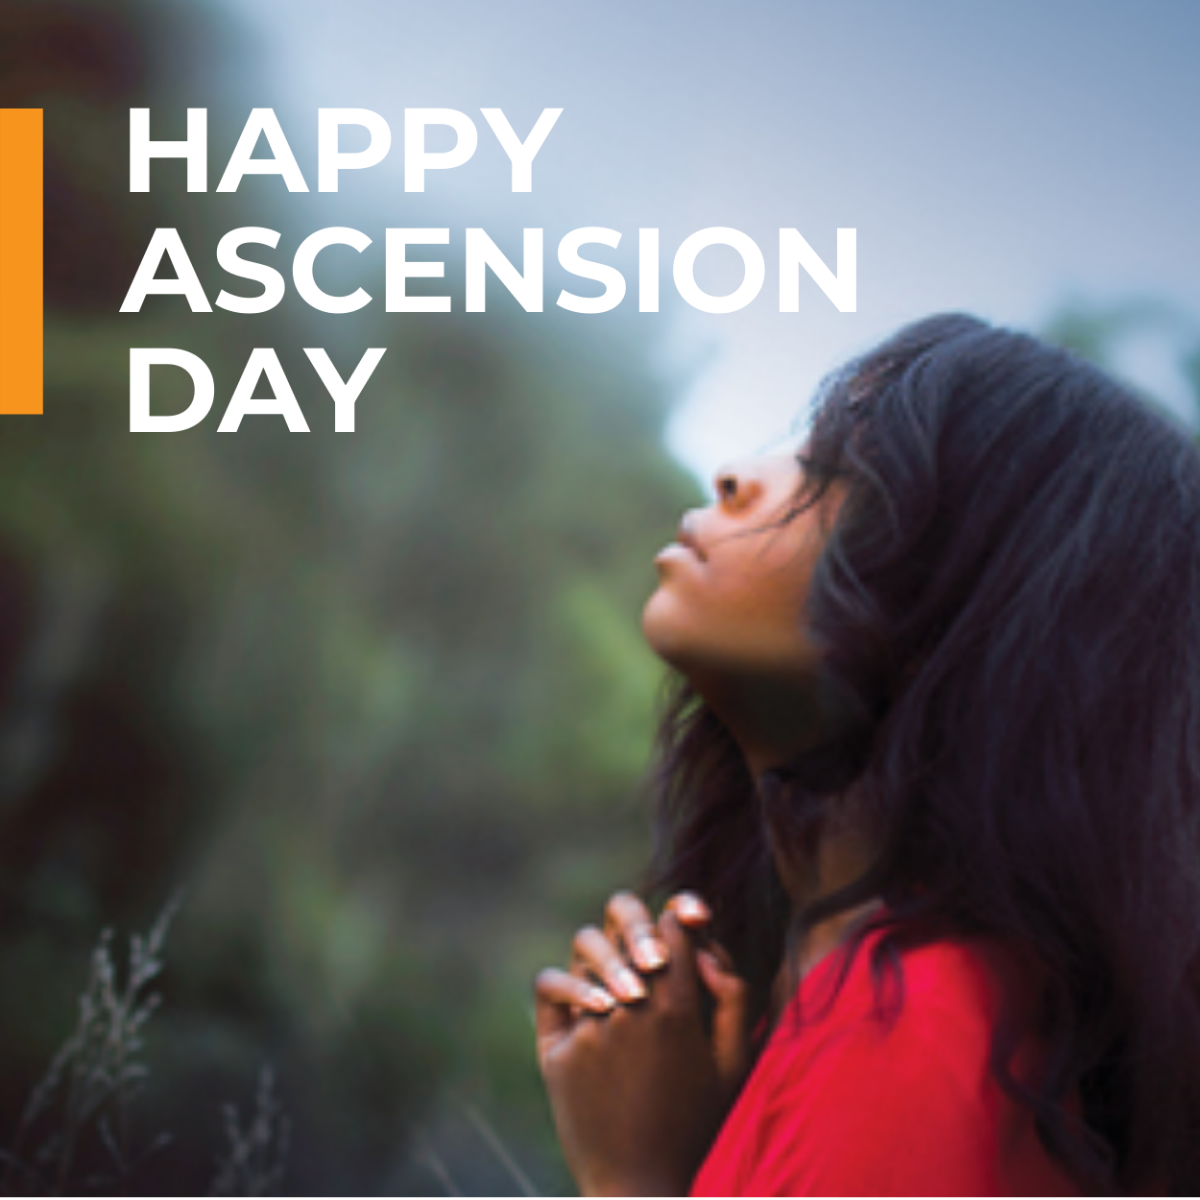 Ascension Day Google Plus Header Photo Template